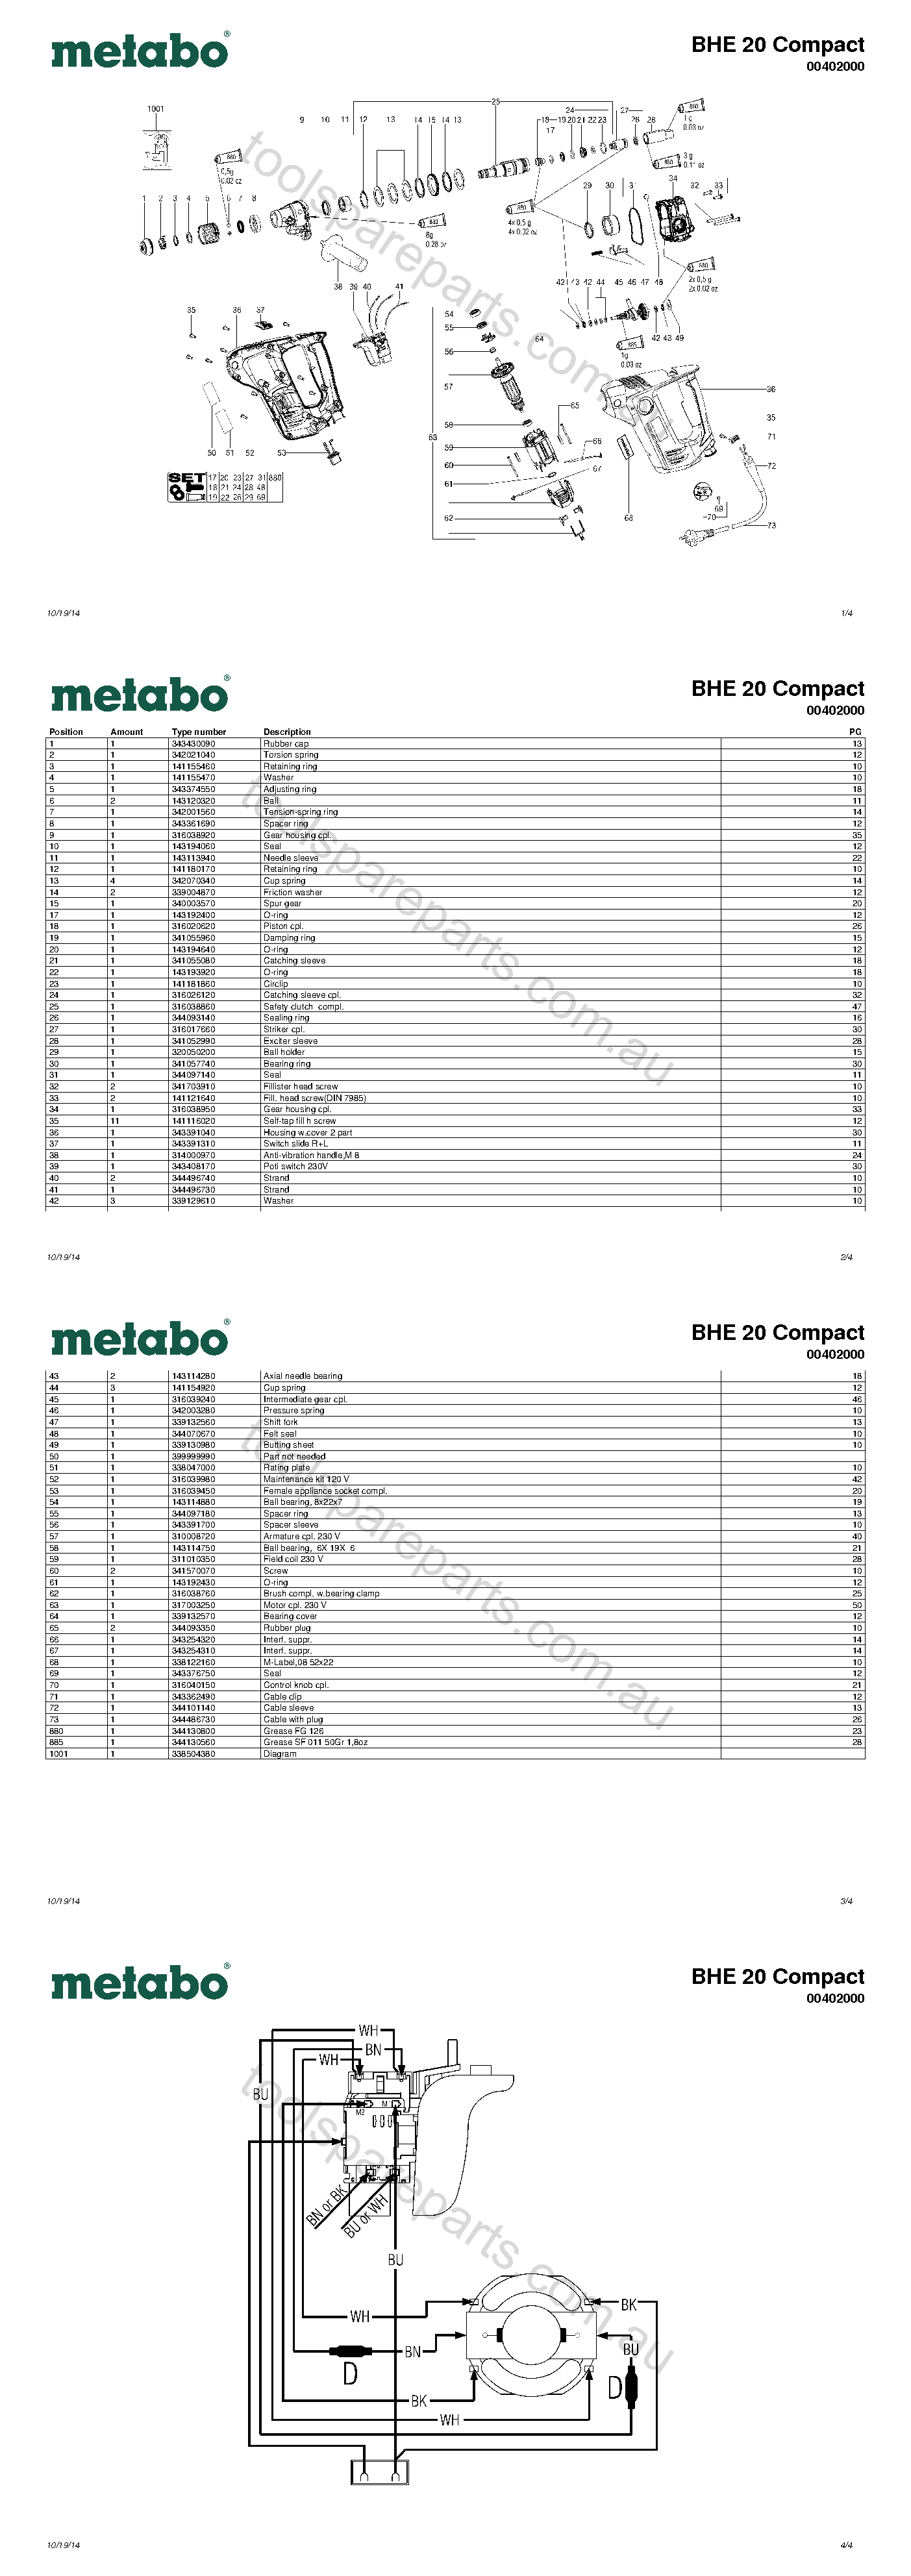 Metabo BHE 20 Compact 00402000  Diagram 1